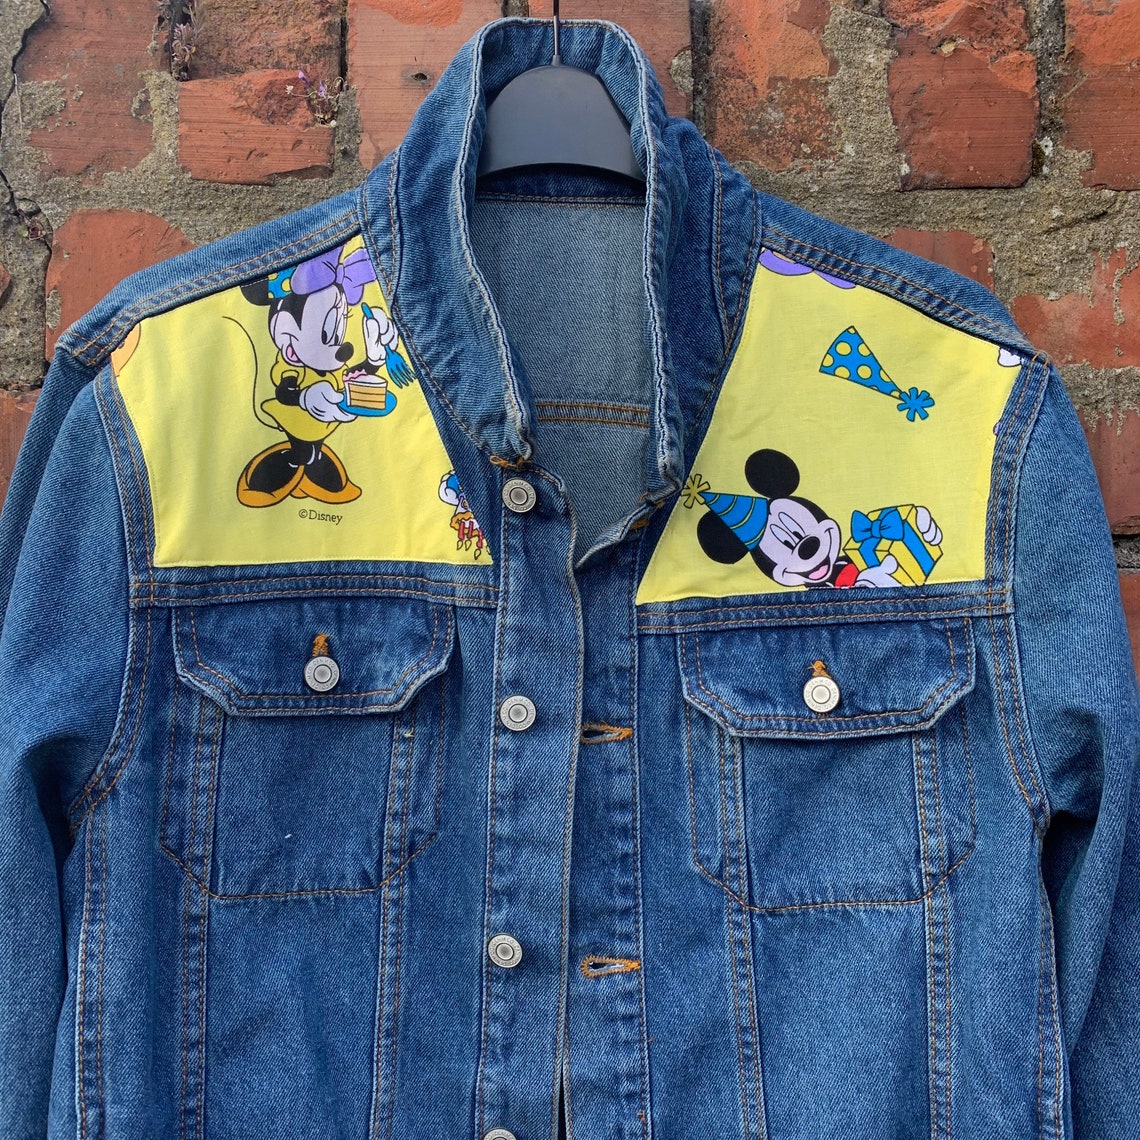 Up-cycled denim jacket with Mickey Mouse and friends birthday | Etsy